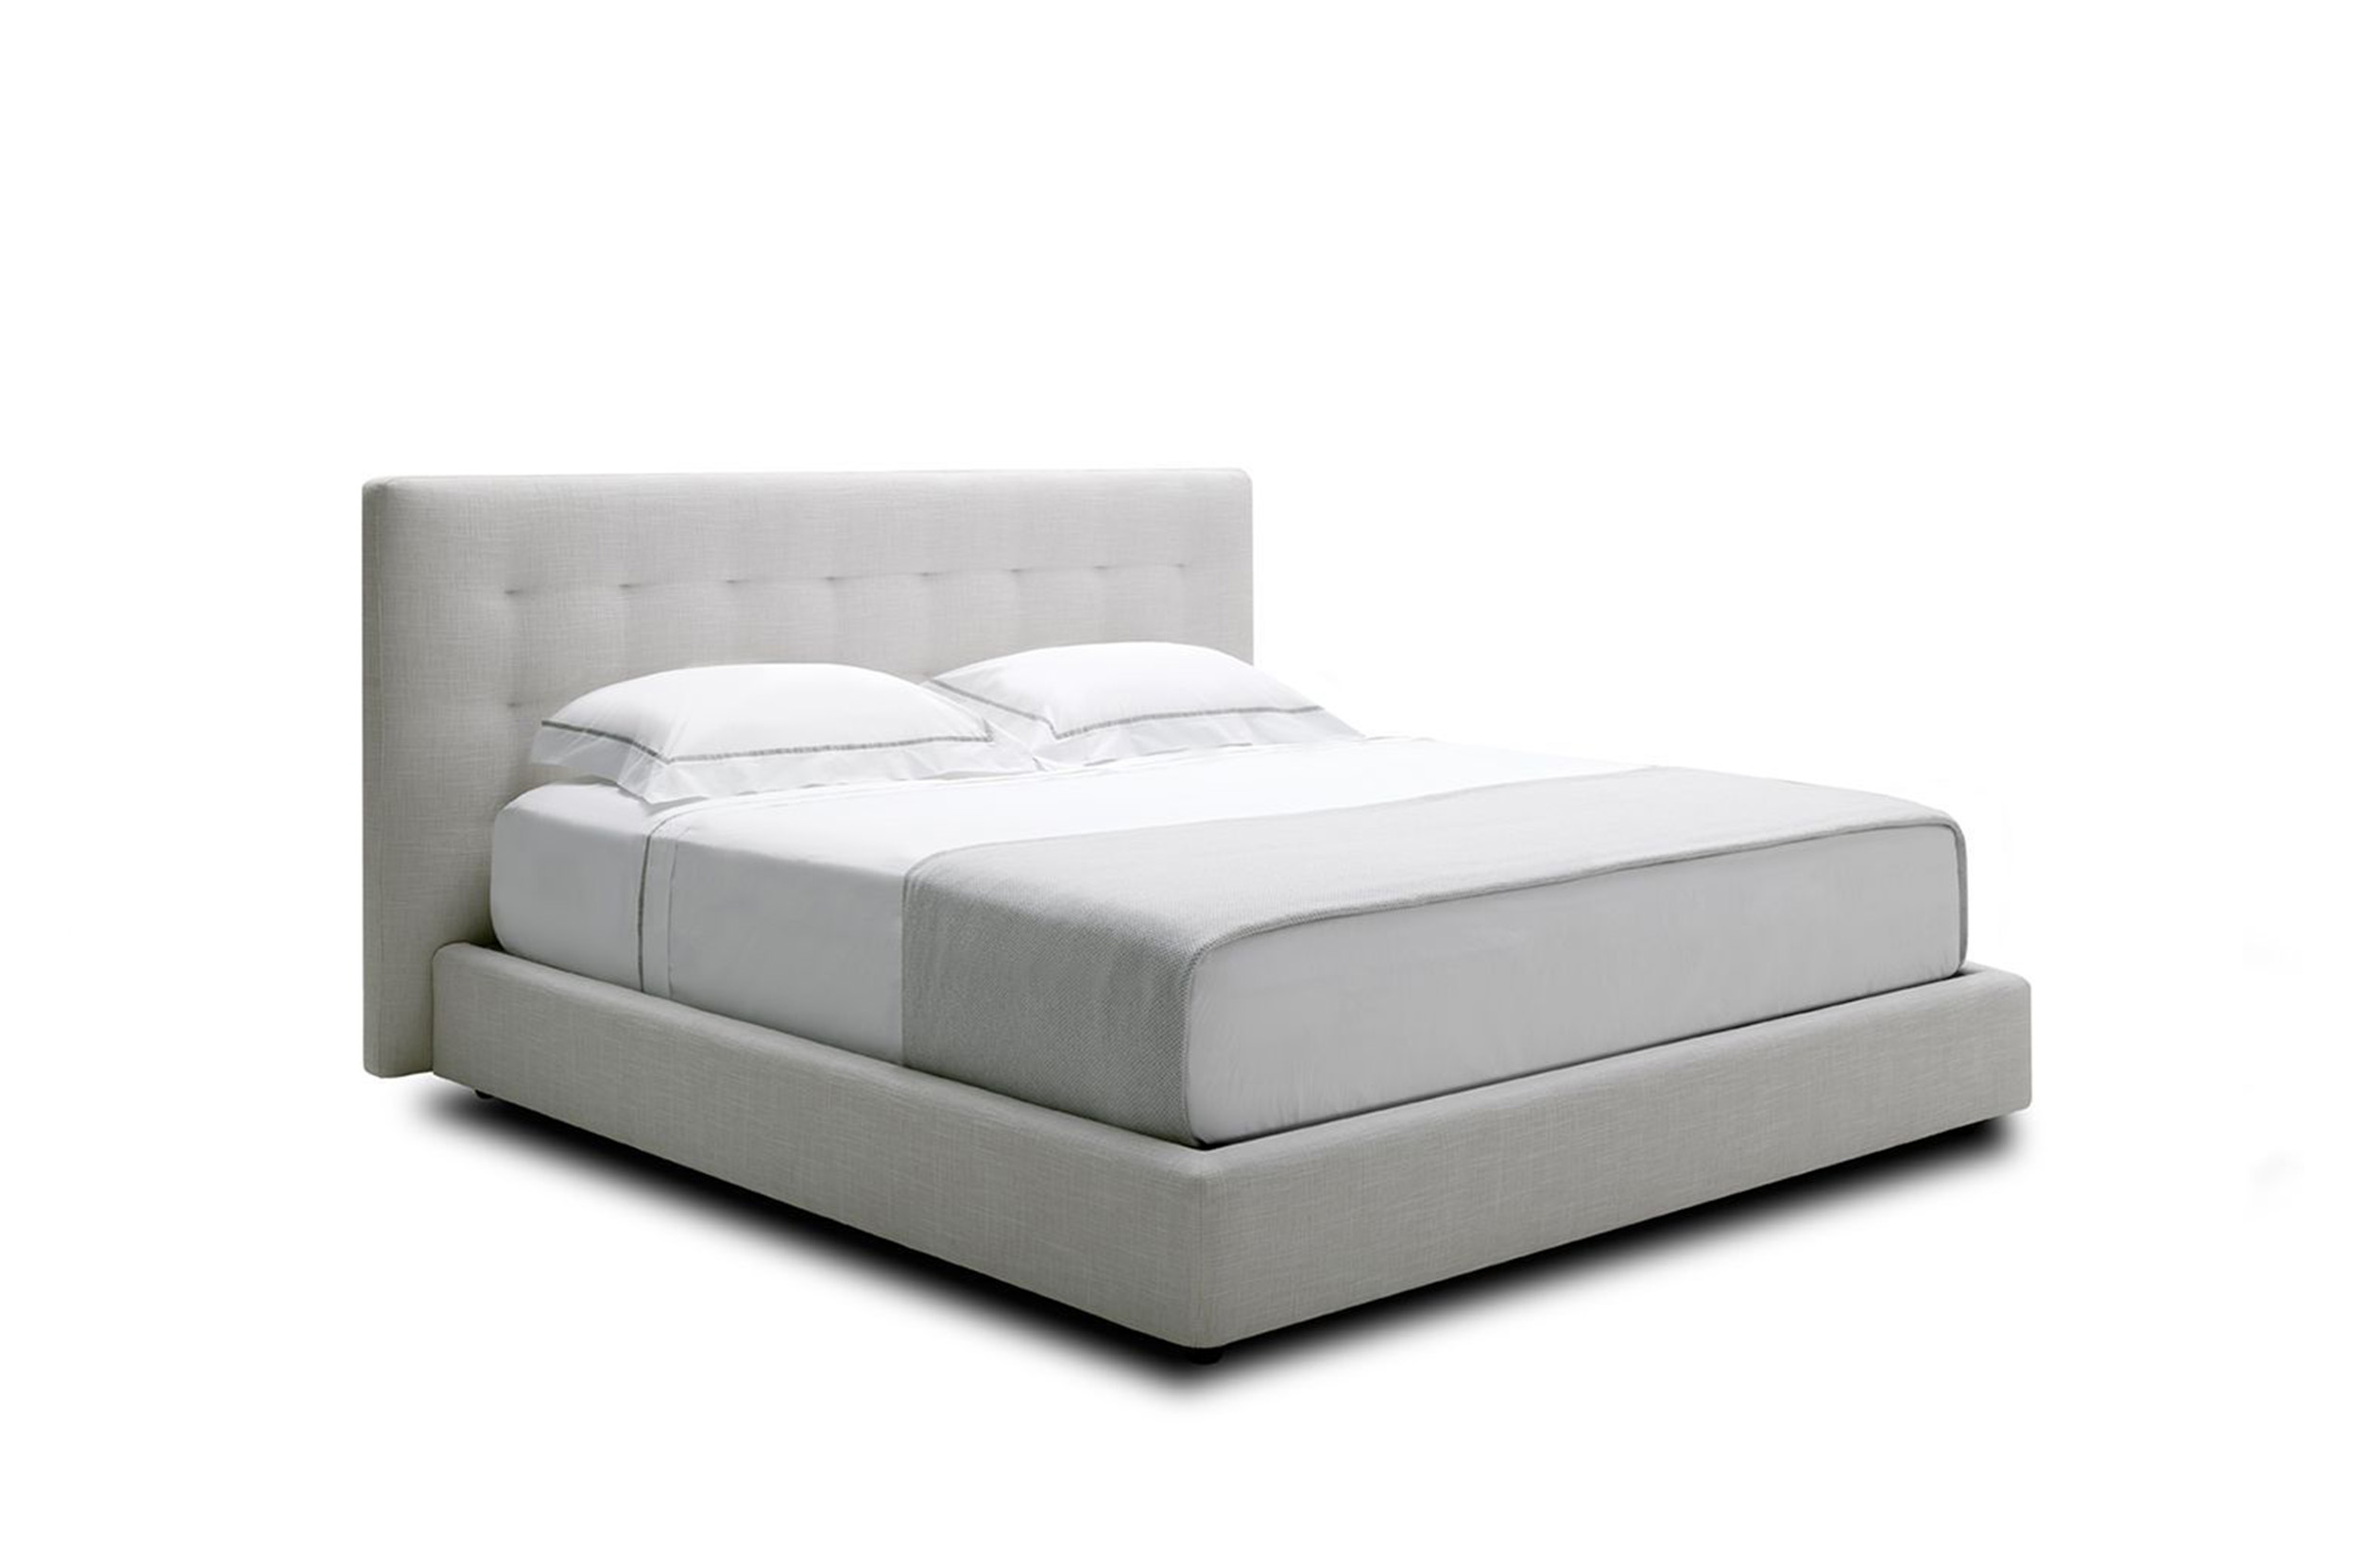 Serenade Soft Storage Bed | Storage Bed | Queen Size Bed | - King Living